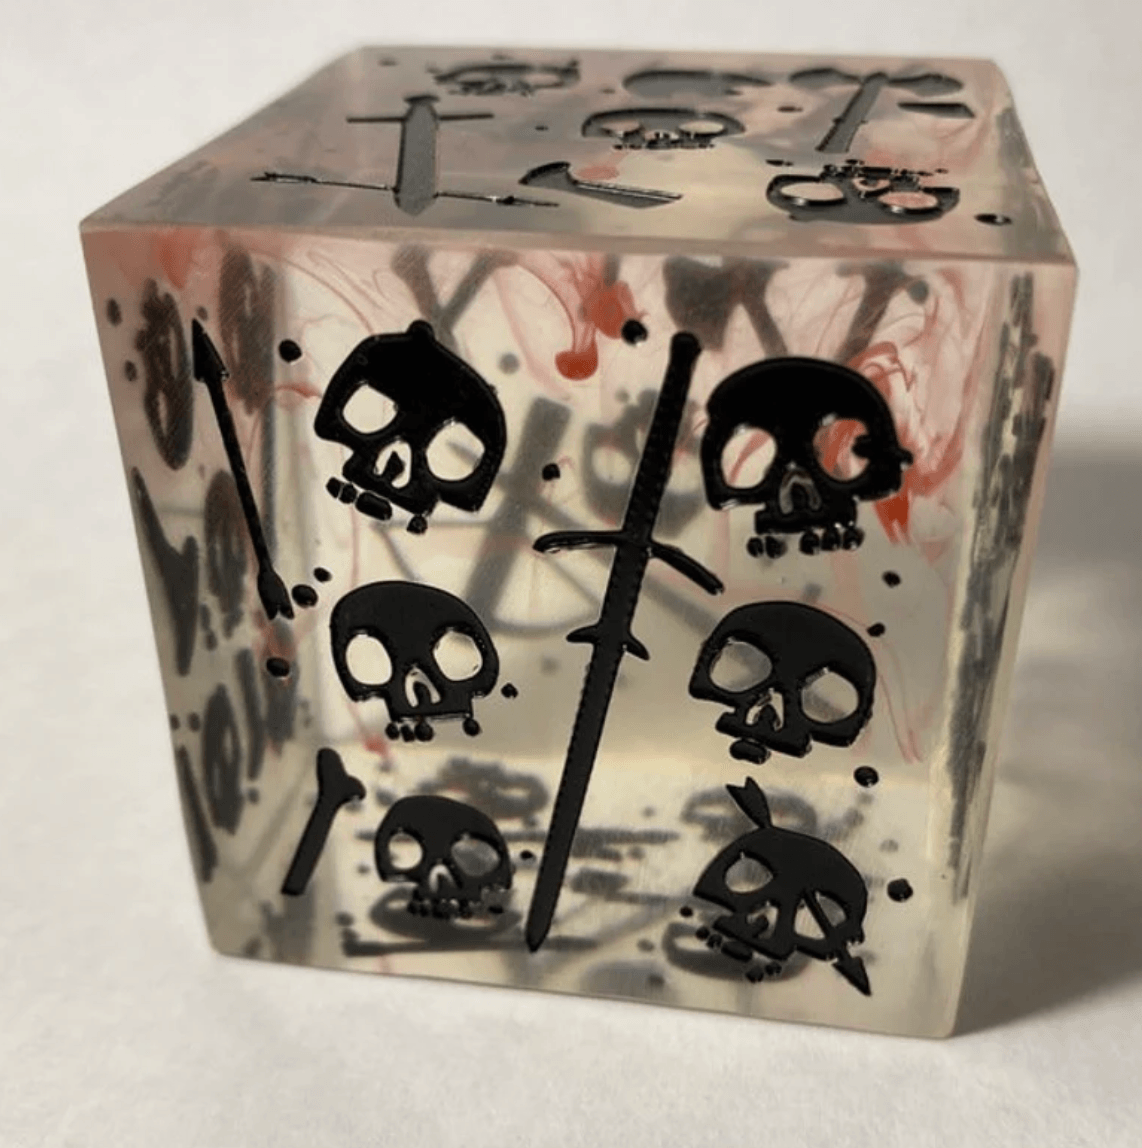 Massive Gelatinous Cube Bundle by Severed Books - Exalted Funeral